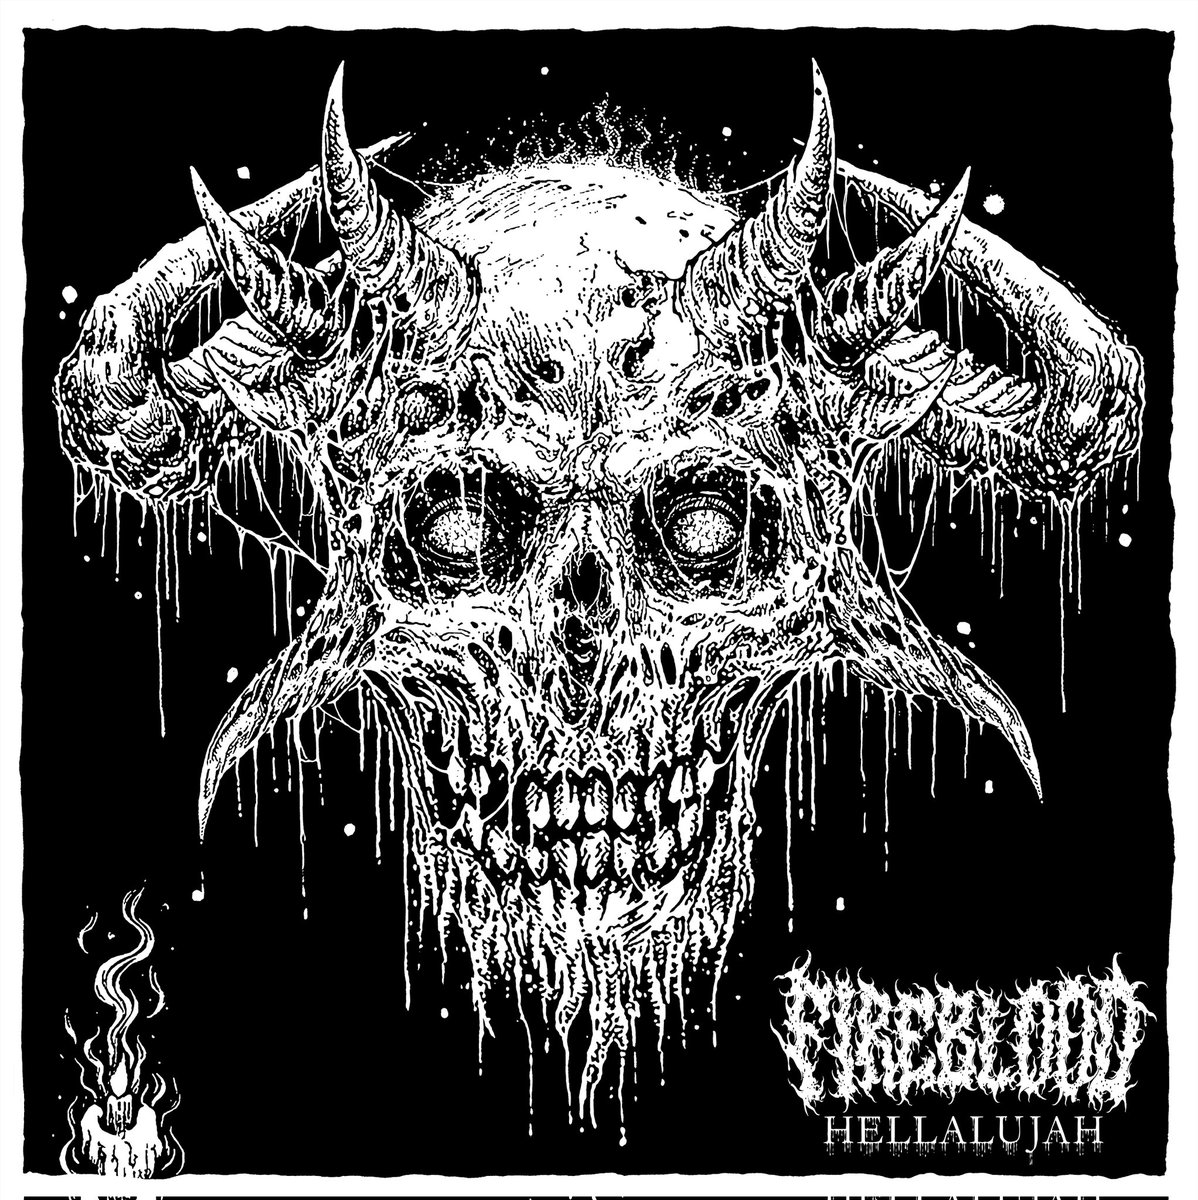 I'm beyond stoked to announce GBPR is working with vicious new sludge outfit @FIREBLOODBAND! Think Red Fang meets Noothgrush. Get wrecked: fireblood.bandcamp.com/album/hellaluj… #sludgemetal #HeavyMetal #deathmetal #noiserock #deathrock #heavyunderground #doommetal